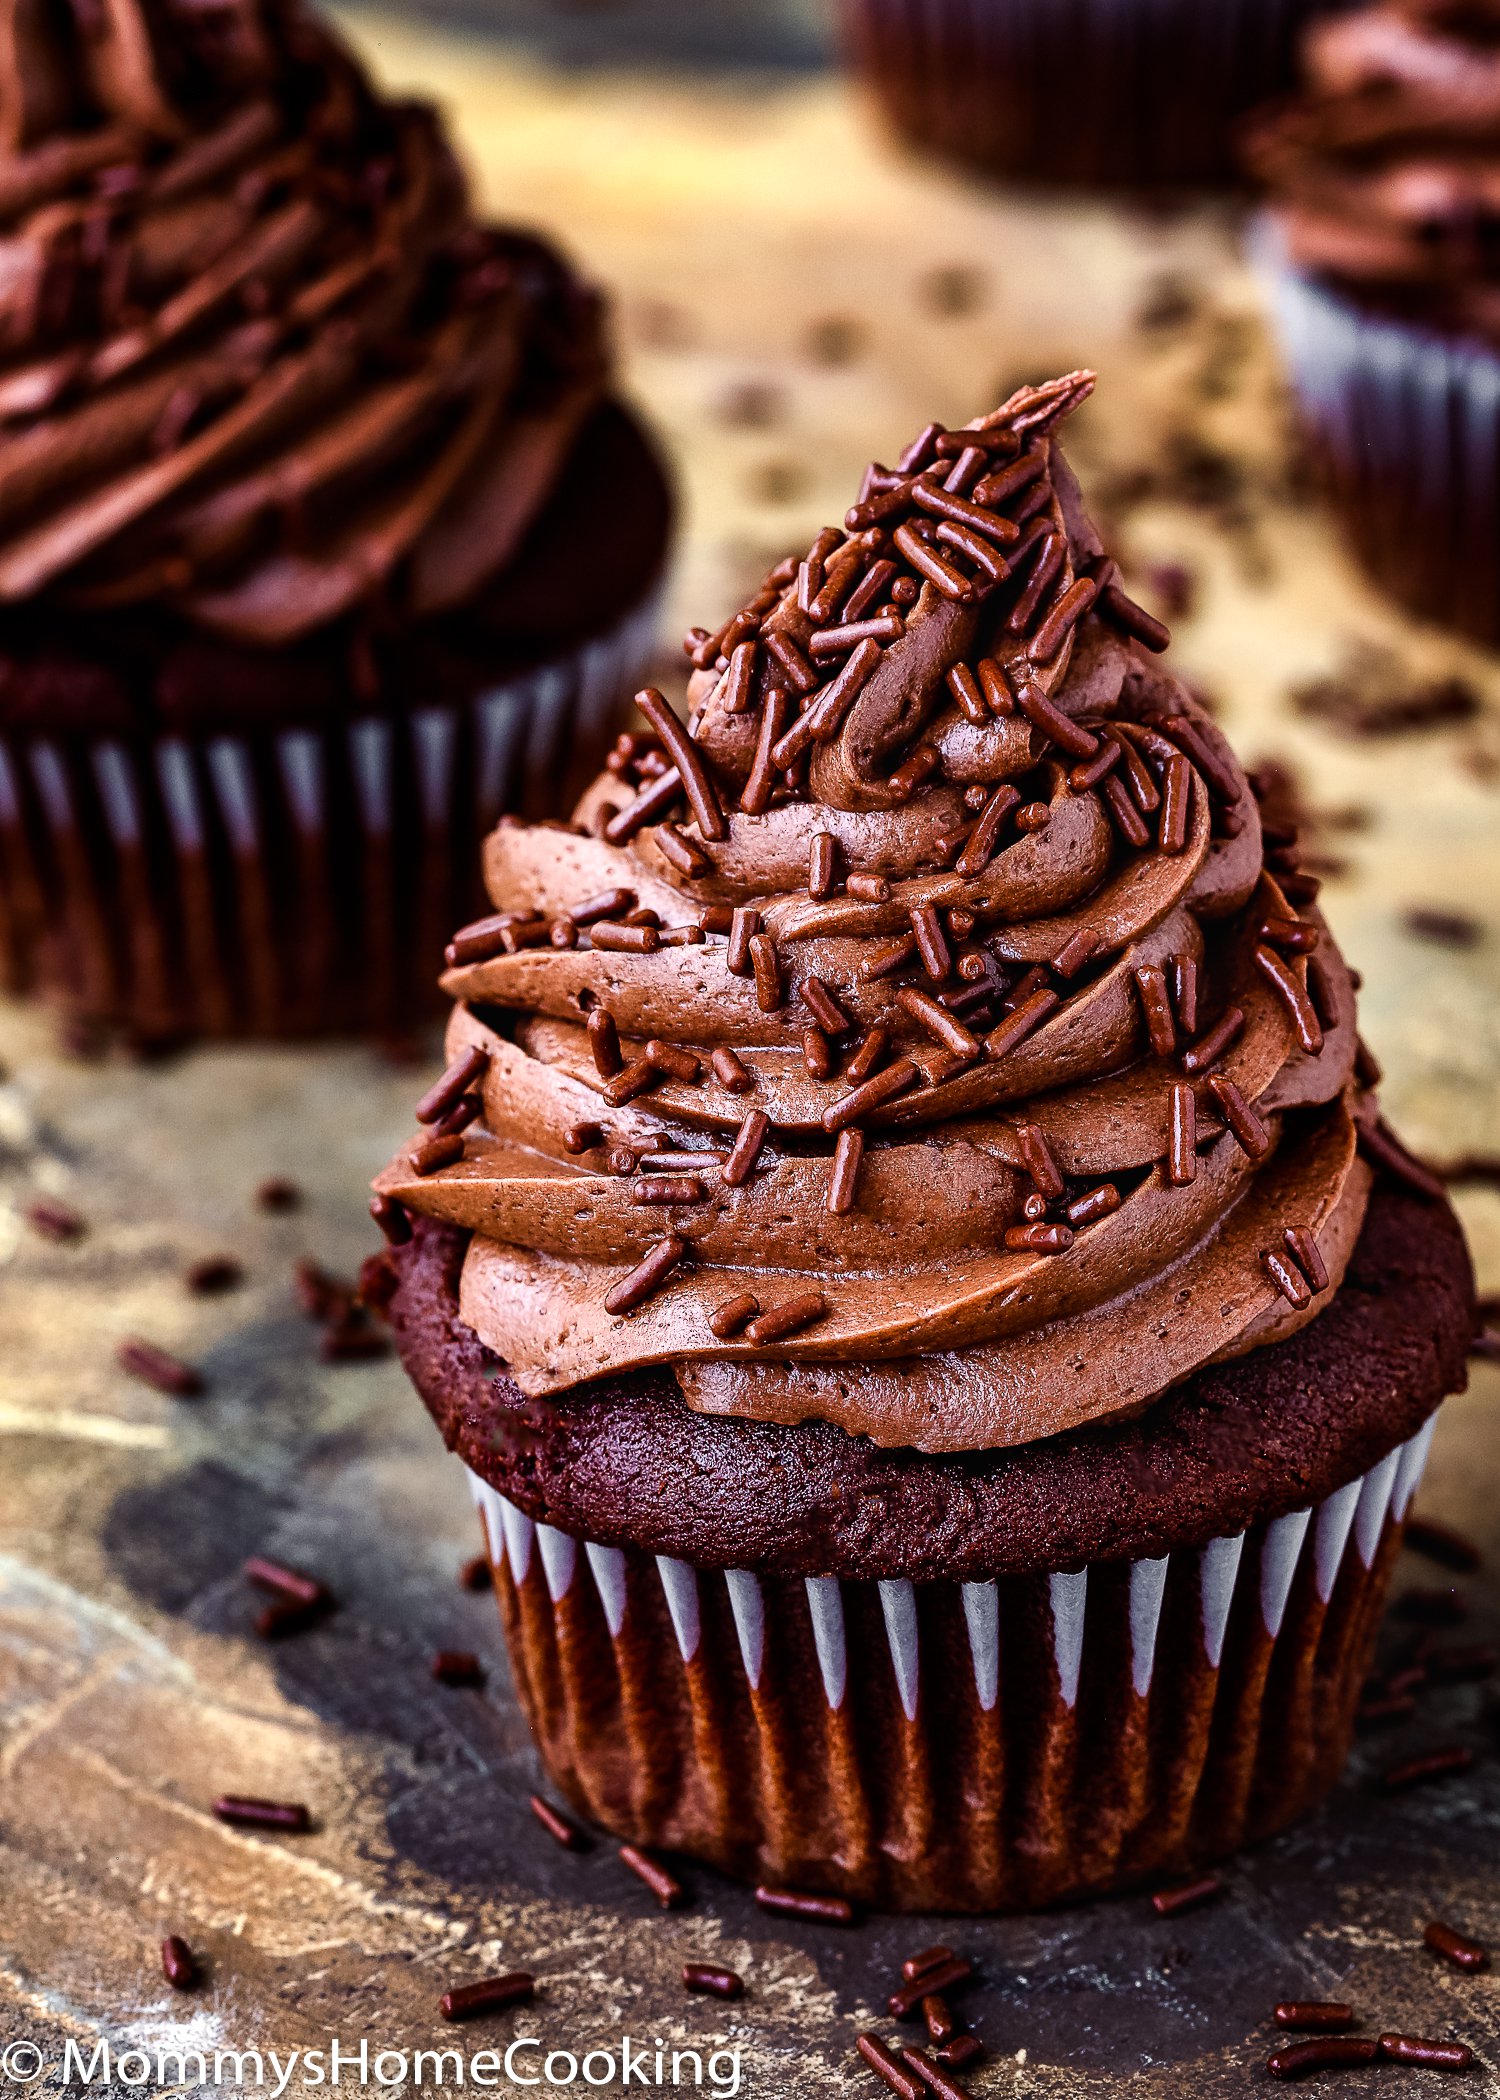 Eggless Chocolate Cupcakes - Mommy's Home Cooking